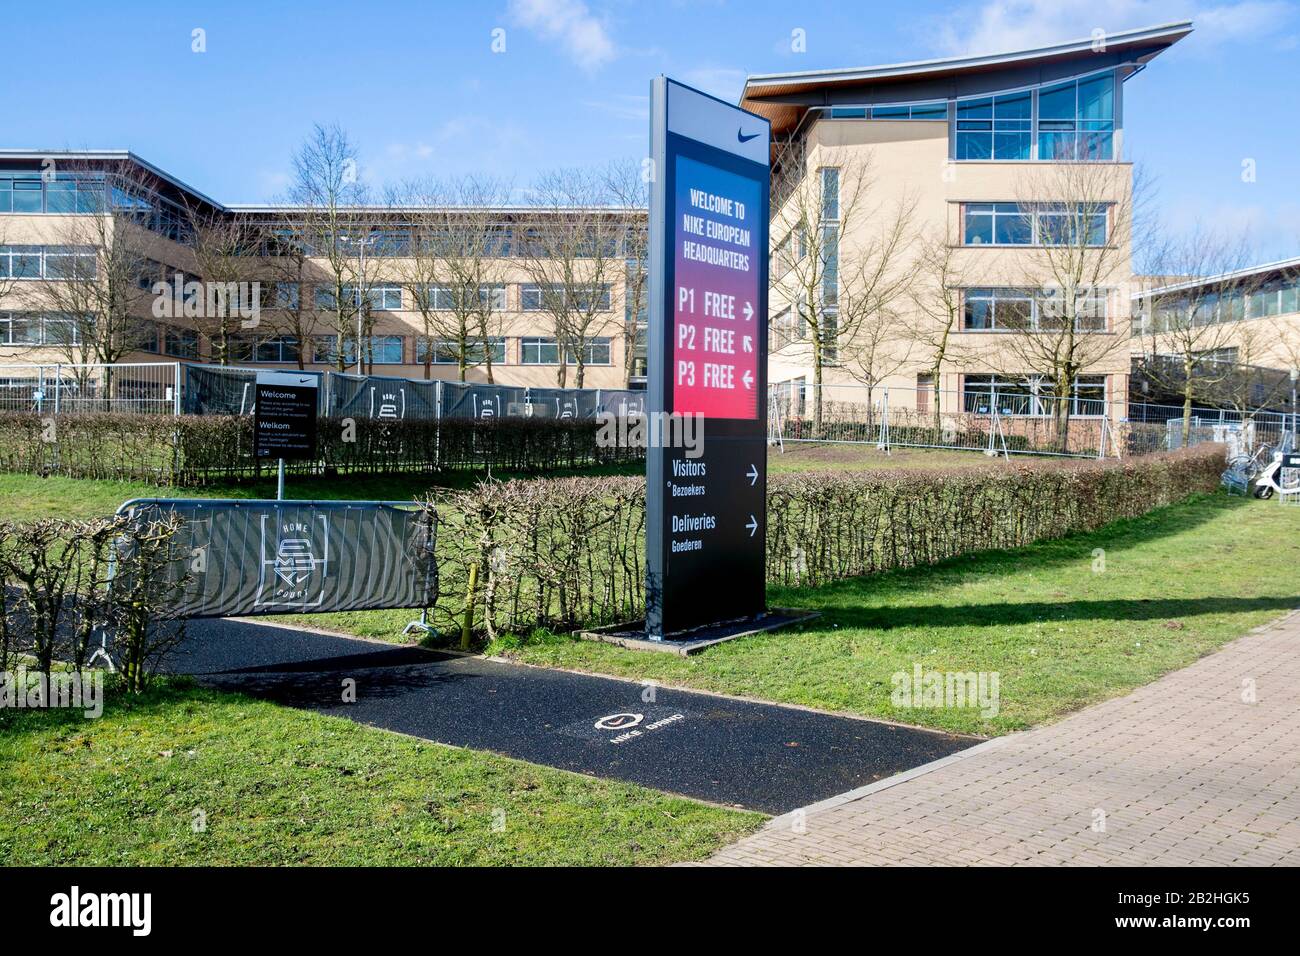 Hilversum, Netherlands. 03rd Mar, 2020. HILVERSUM, Sportpark, 03-03-2020, European headquarters Nike closed to corona contamination. Exterior of the Nike European Headquarters. The office of the sports brand keeps the doors closed